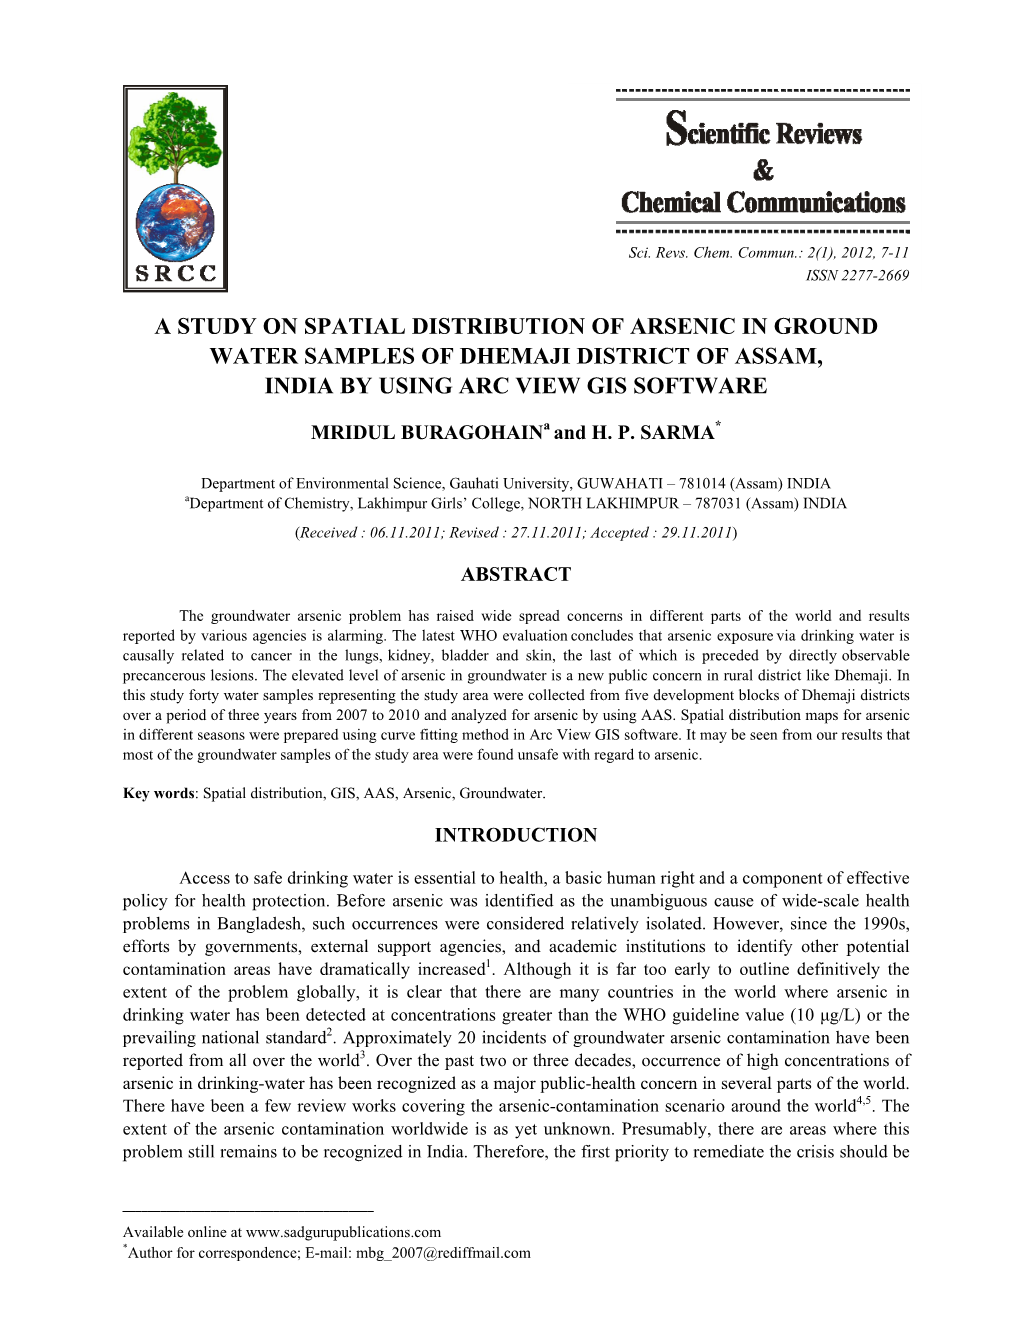 A Study on Spatial Distribution of Arsenic in Ground Water Samples of Dhemaji District of Assam, India by Using Arc View Gis Software